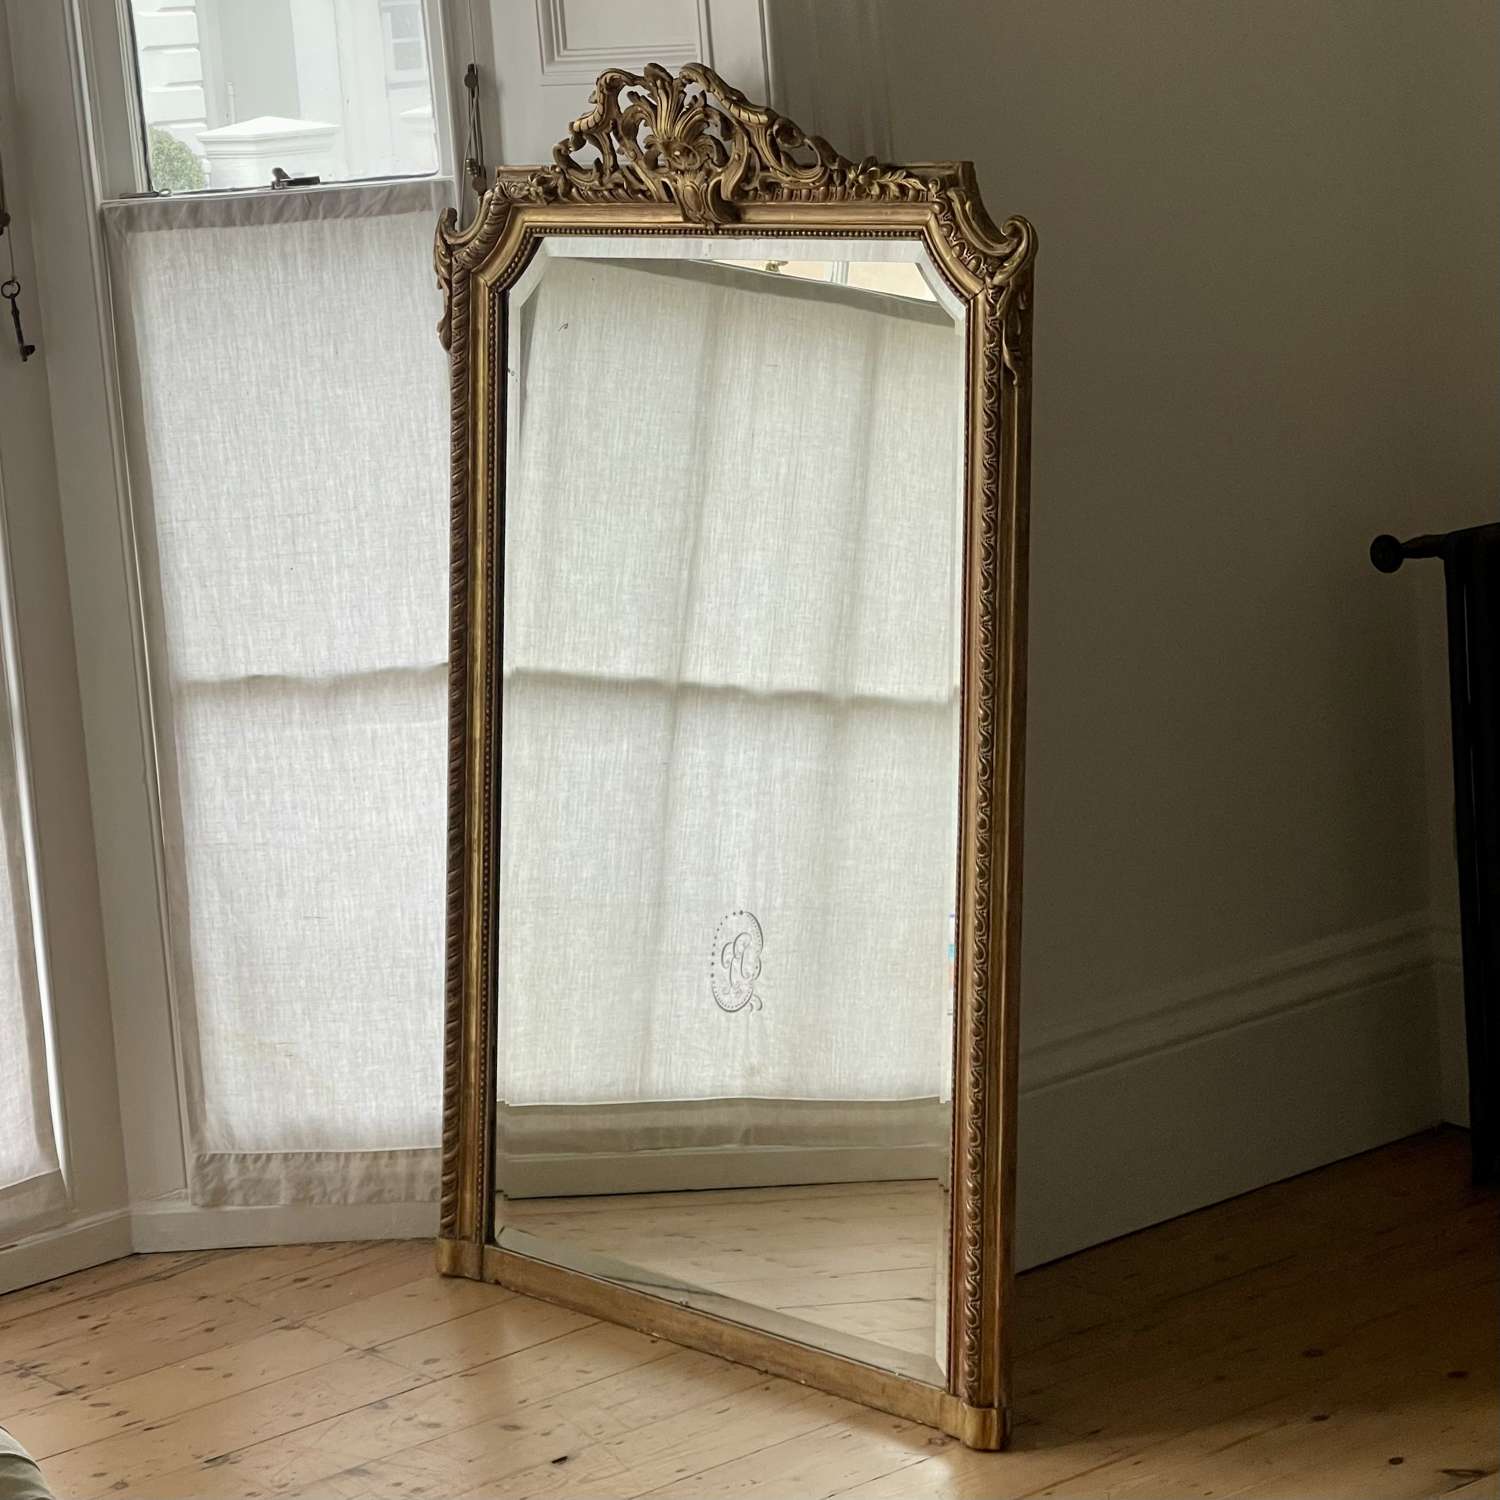 Large antique French gilt mirror - bevelled glass